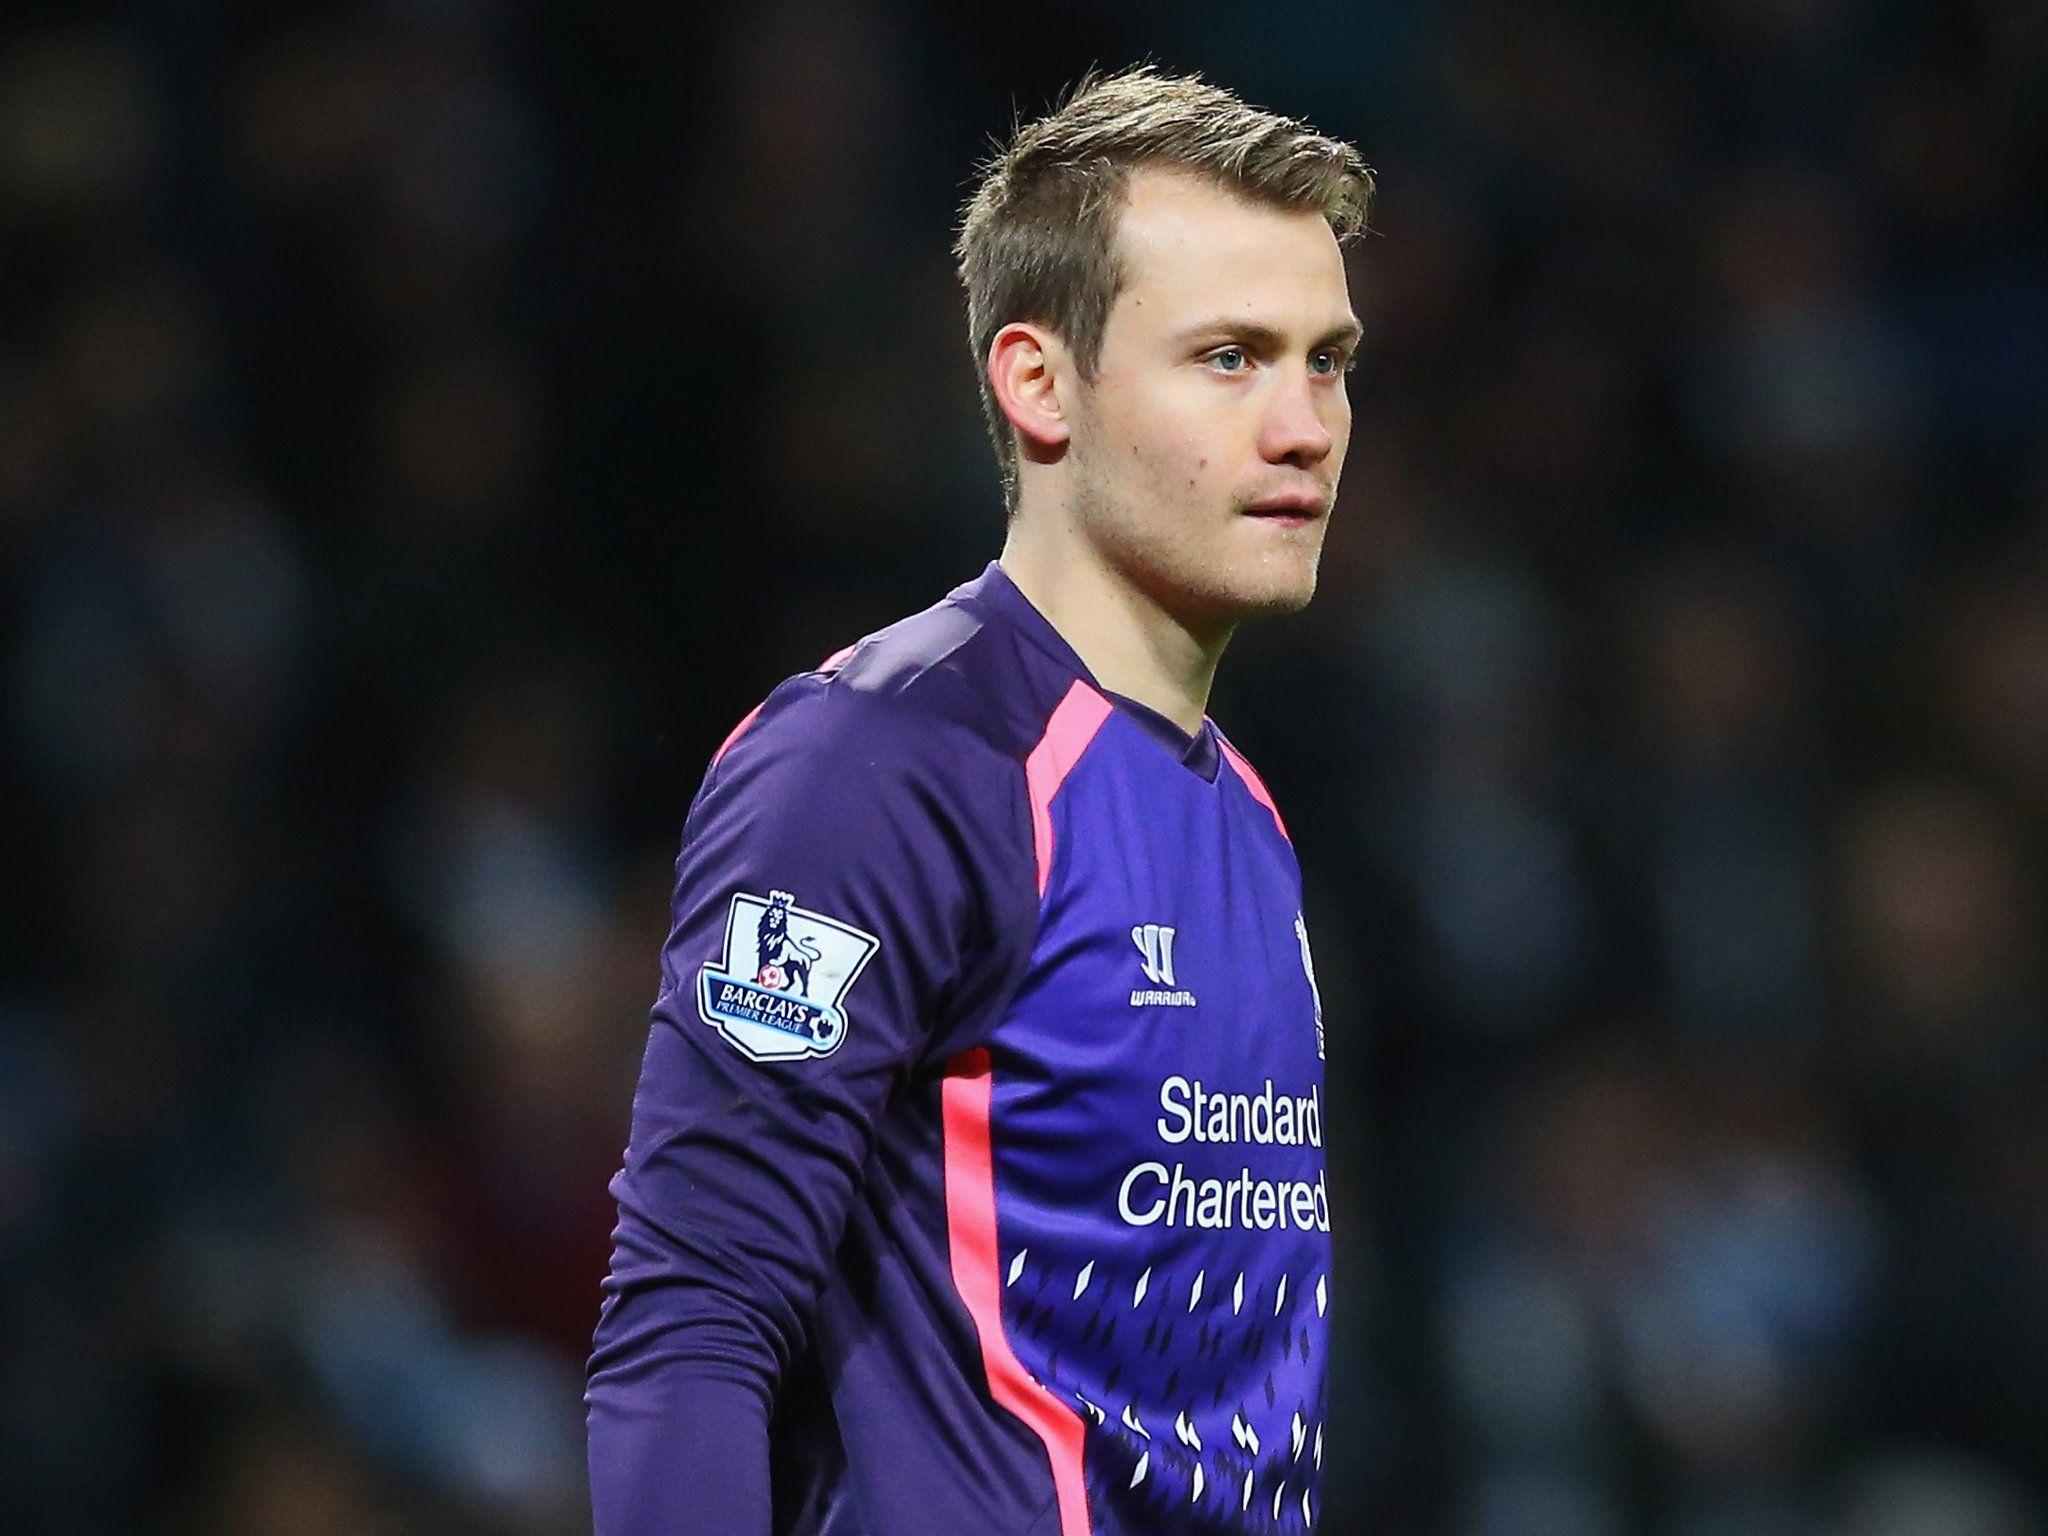 Simon Mignolet: I'm not getting carried away with recent good form